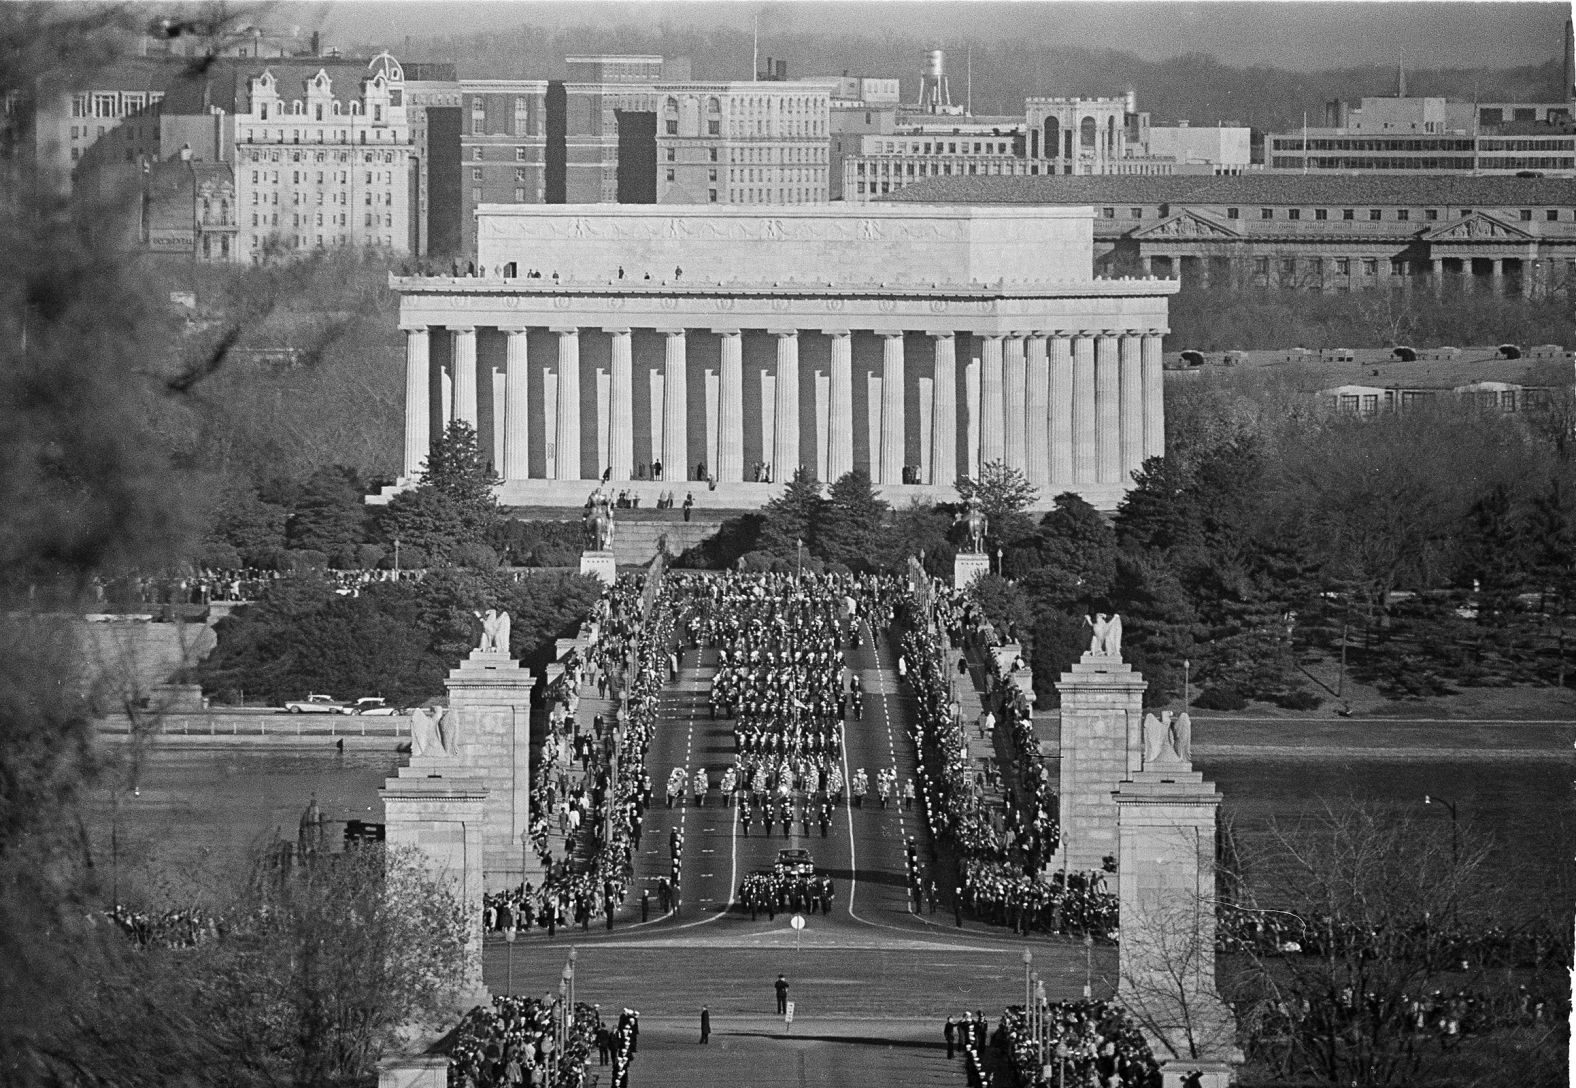 Kennedy's funeral procession crosses the bridge leading to Arlington National Cemetery in Arlington, Virginia.